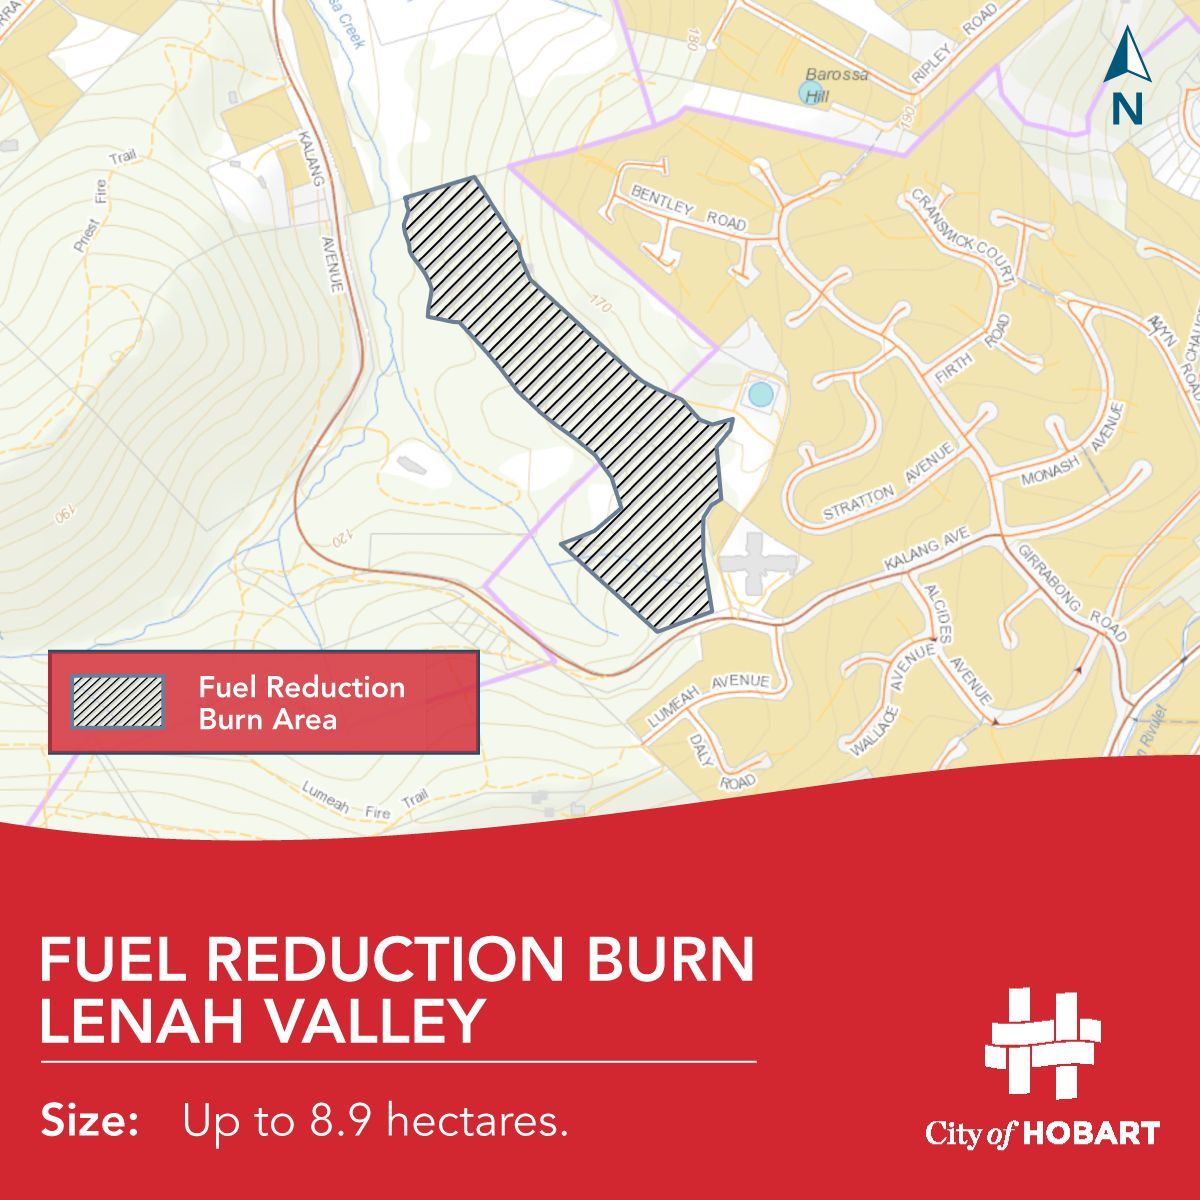 We plan to carry out a fuel reduction burn in Lenah Valley today, Tuesday 7 November. Some smoke may be produced, but we will make every effort to minimise the impact on nearby areas. For more information about this burn read our Burn Alert: bit.ly/BurnAlertLenah…